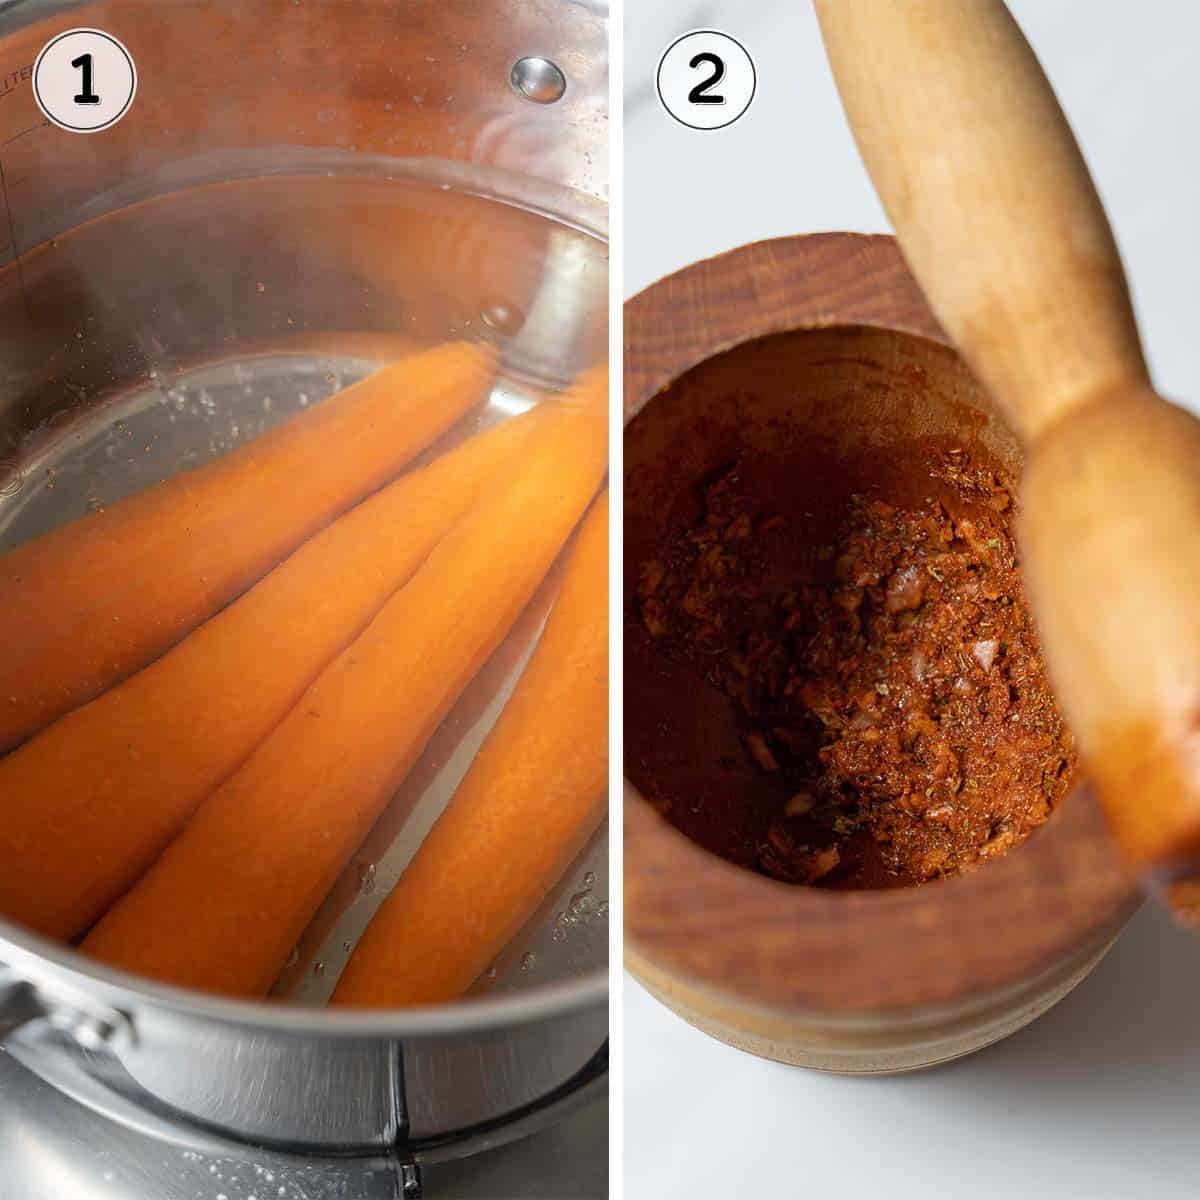 boiling the carrots and grinding the spice paste.